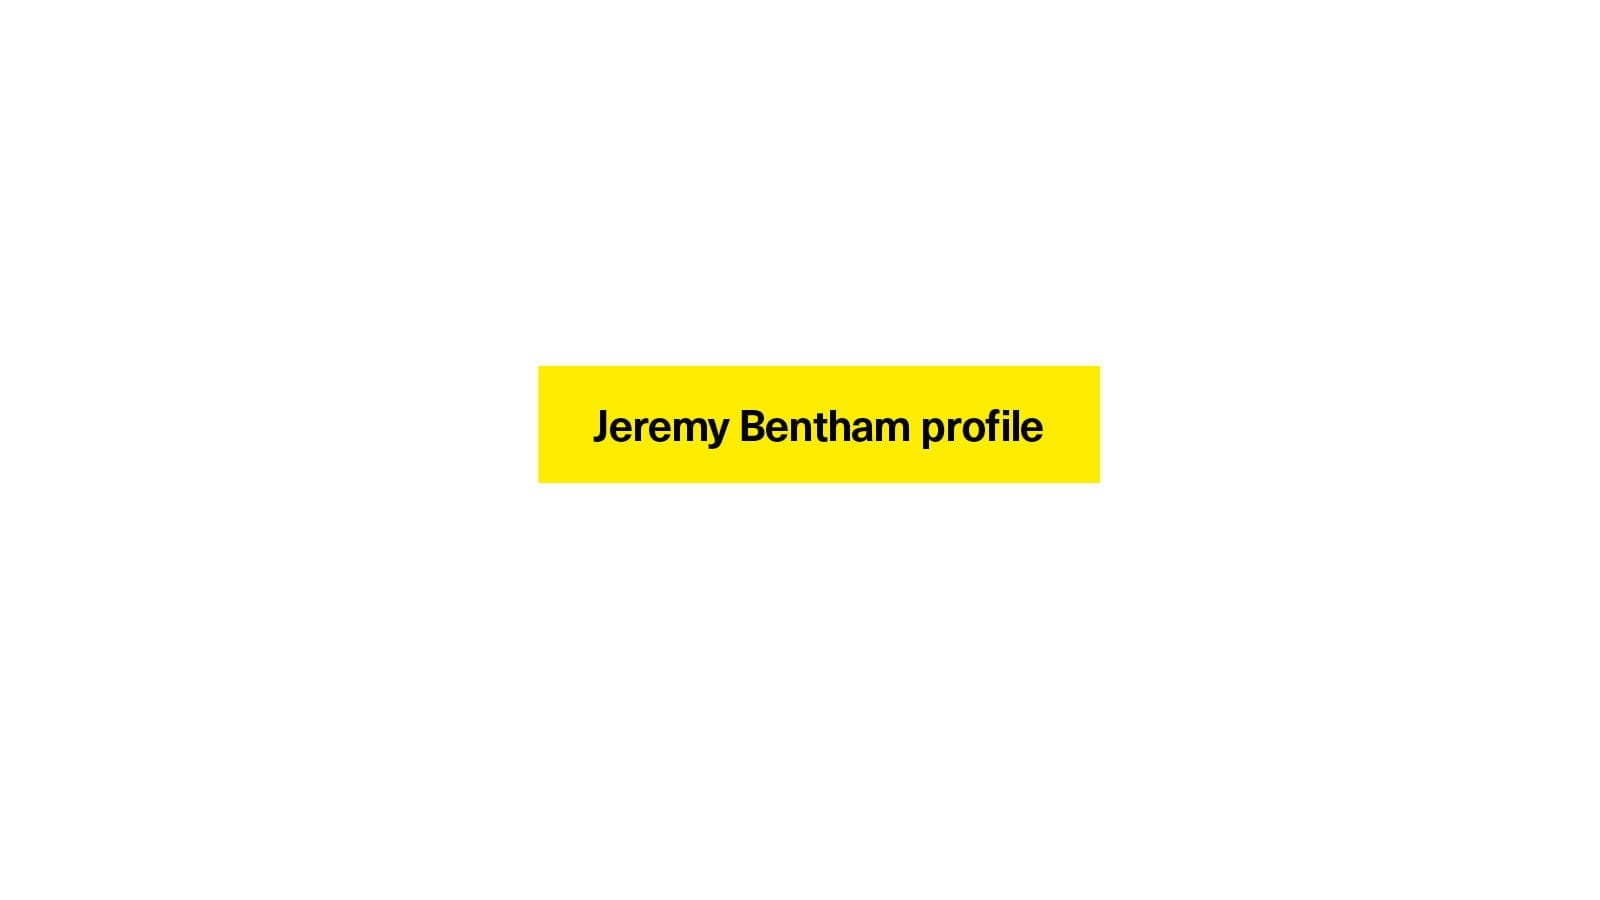 ICAEW Future of Boards business Jeremy Bentham philosopher